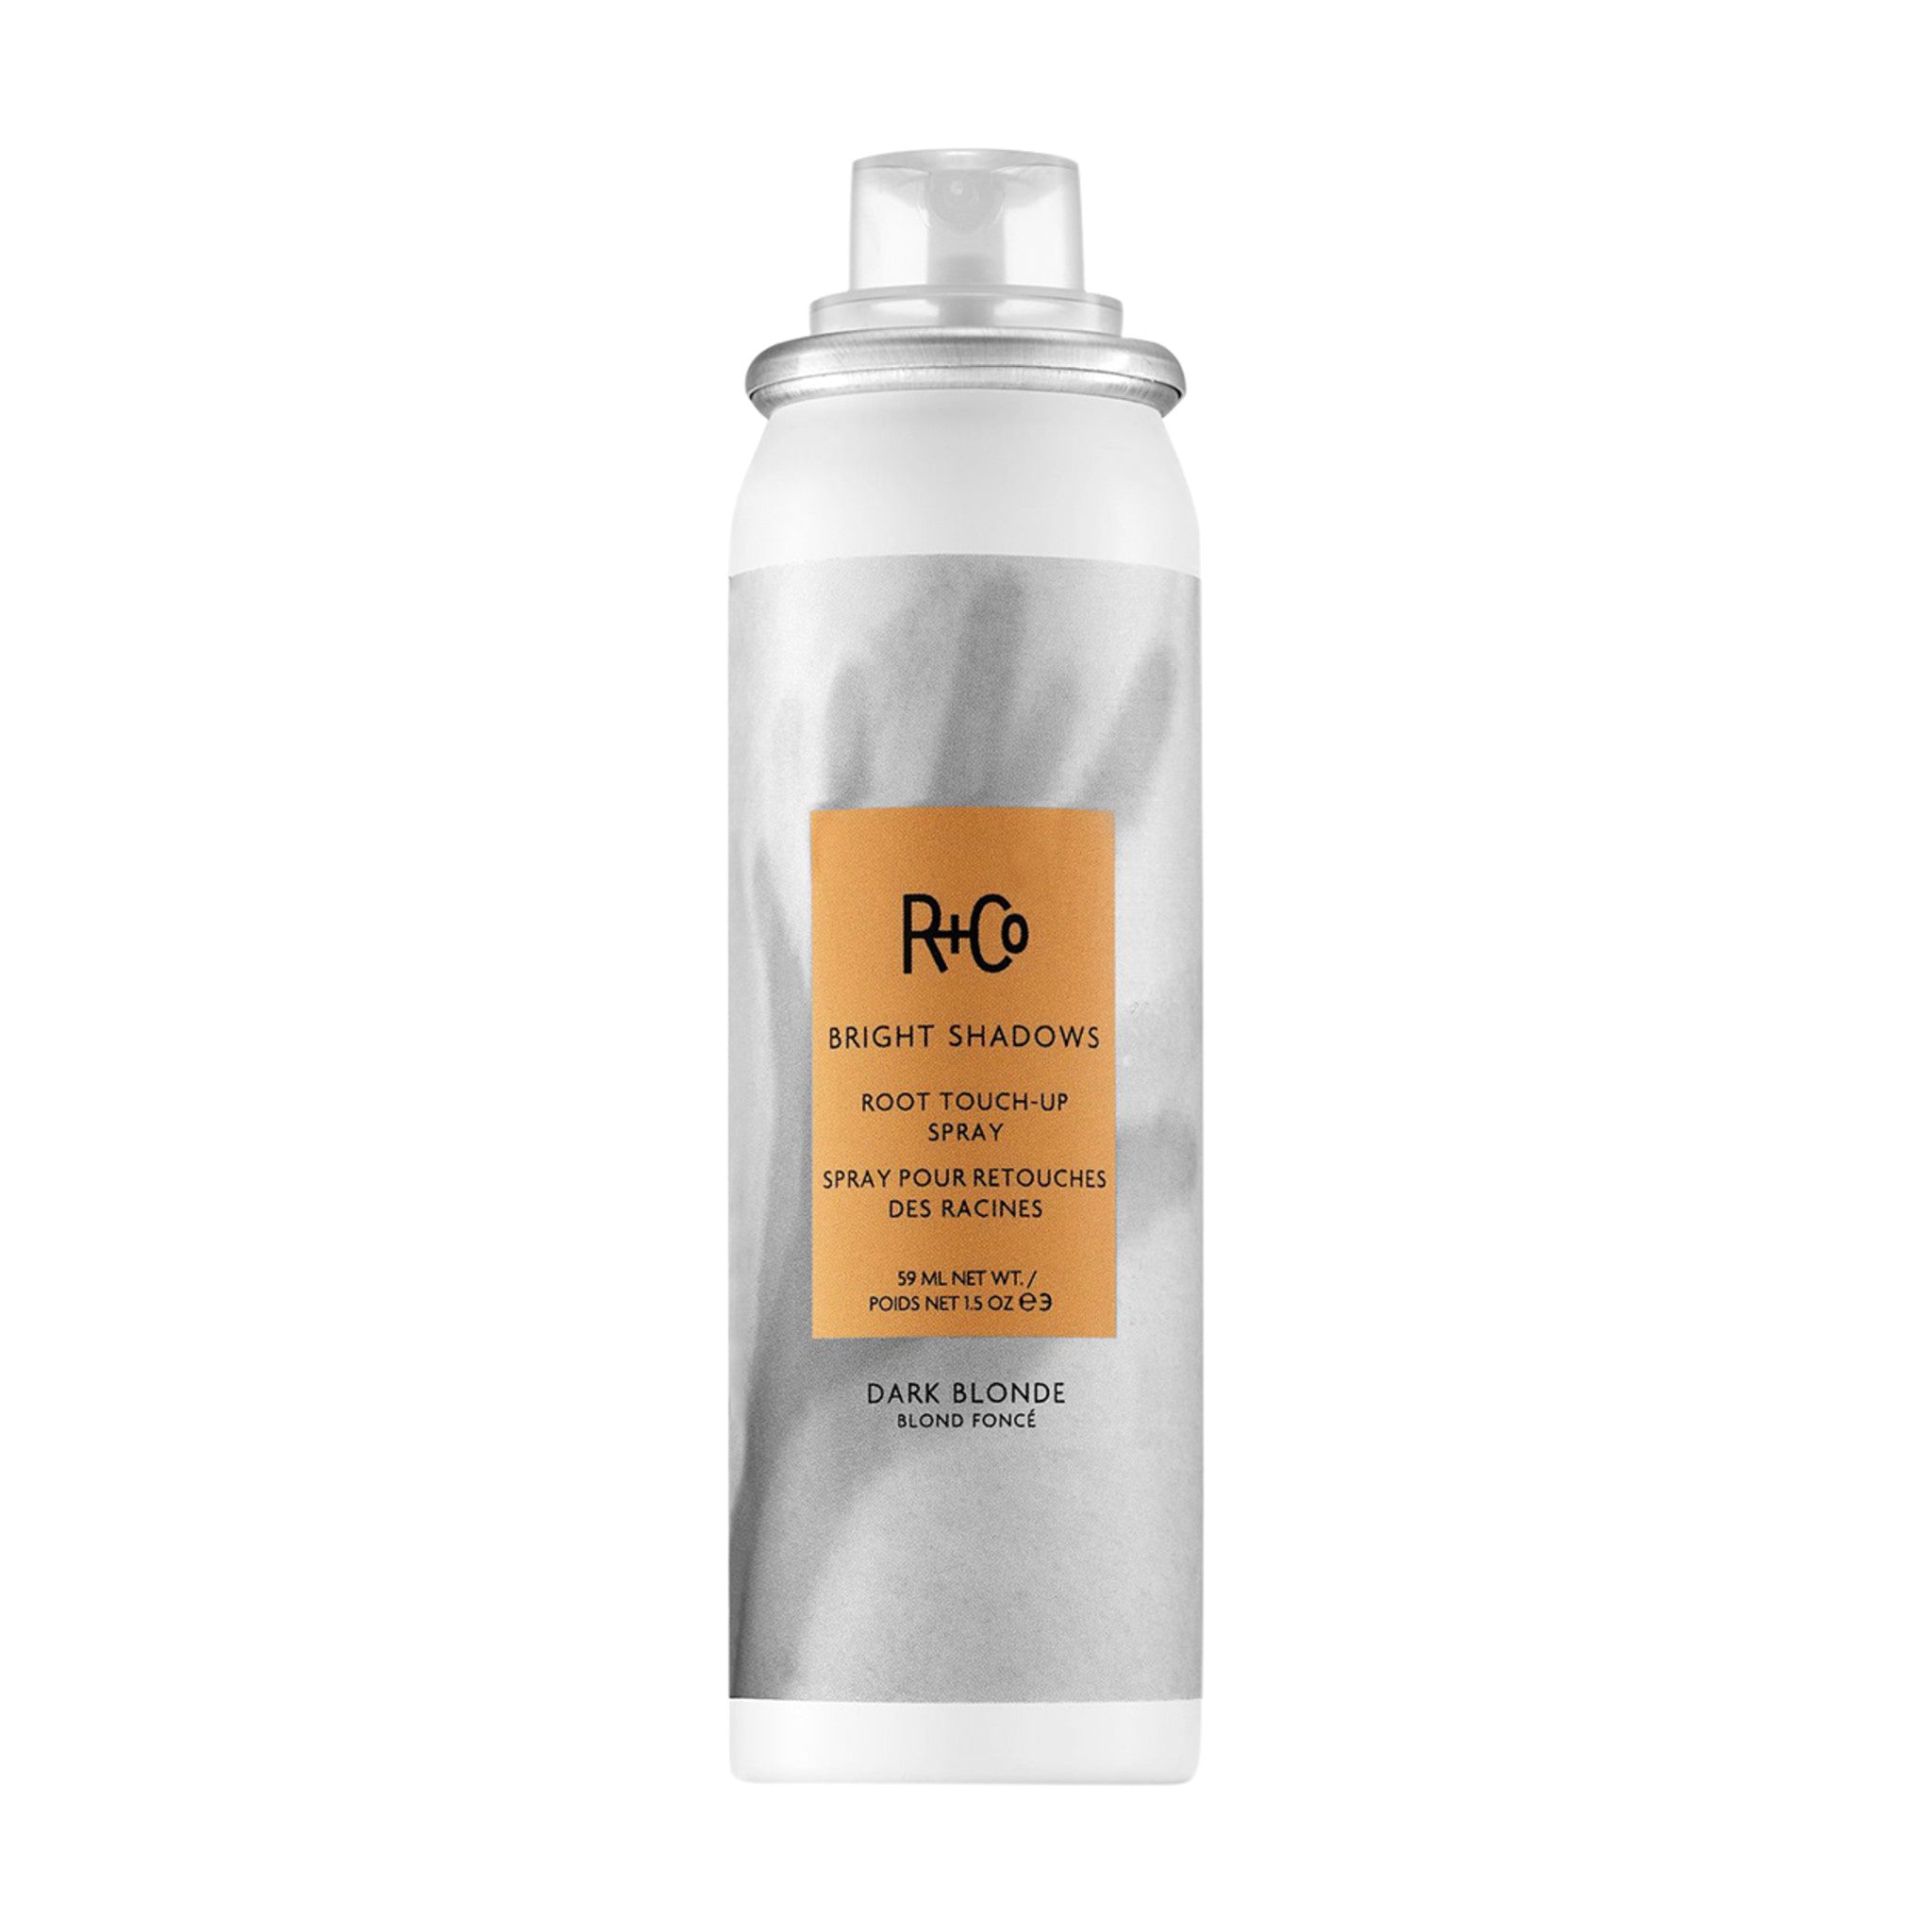 R+Co Bright Shadows Root Touch Up Spray Dark Blonde main image. This product is for blonde hair